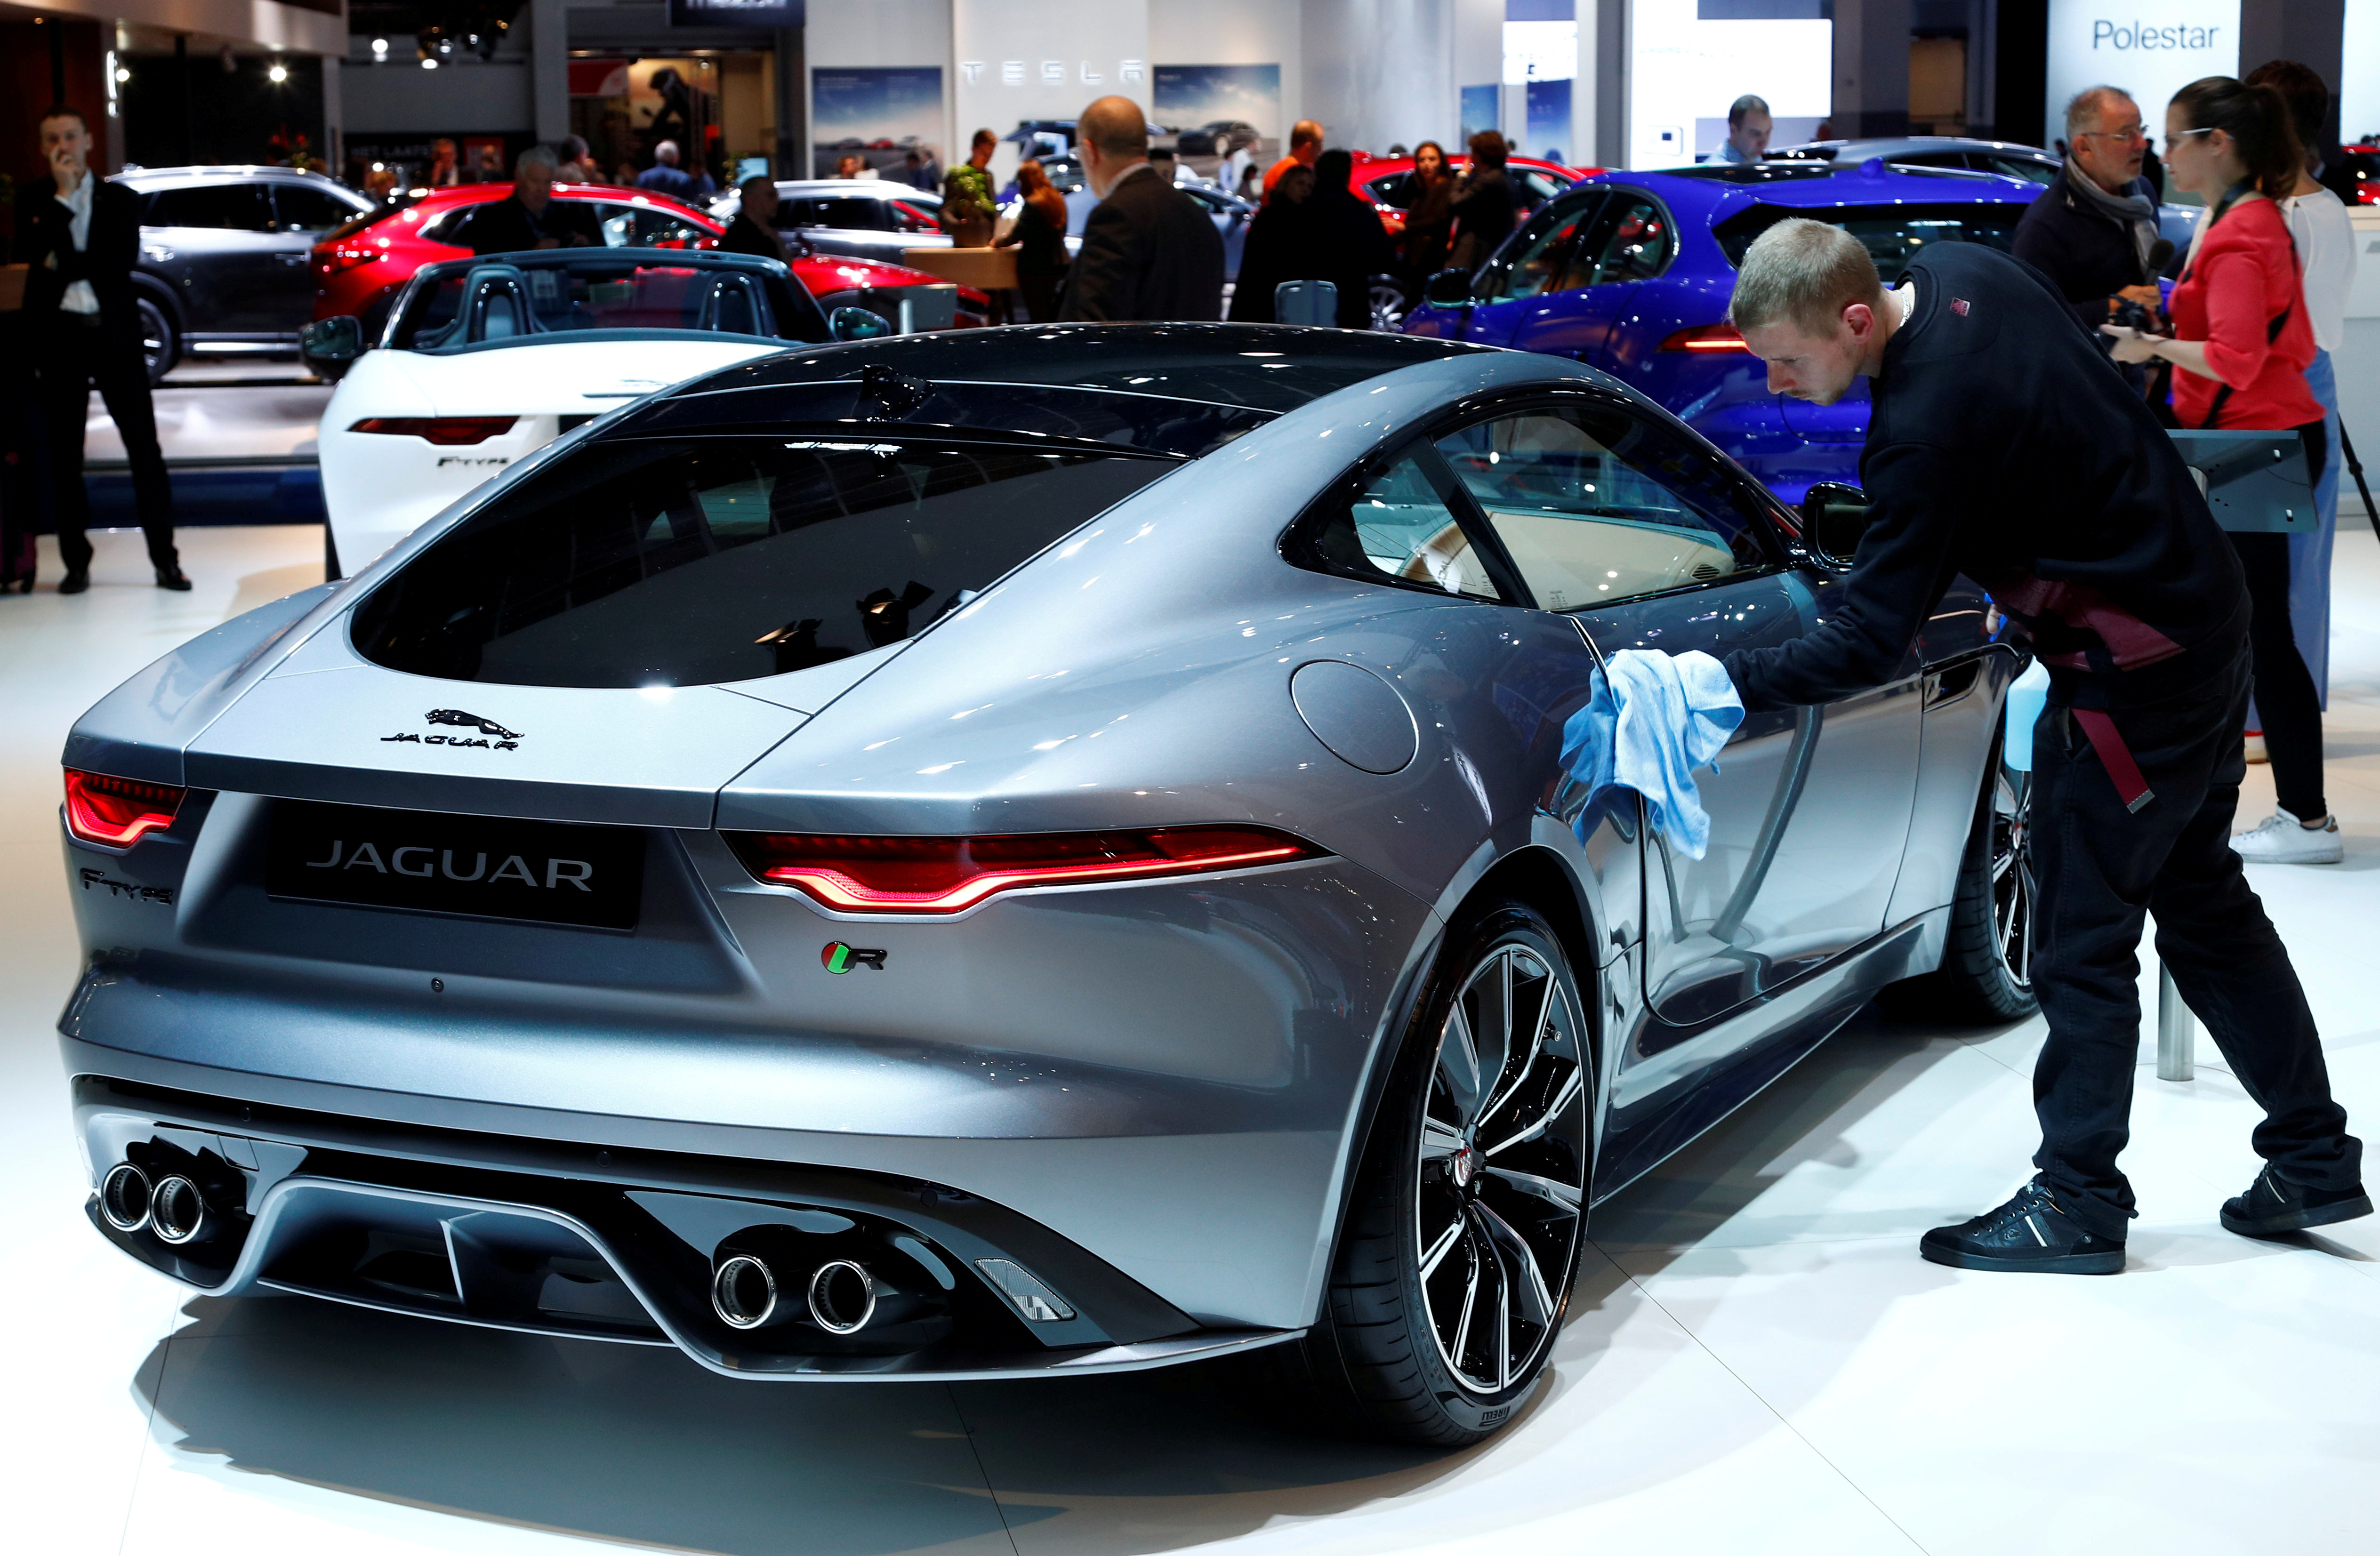 A worker cleans a new Jaguar F-Type model at Brussels Motor Show